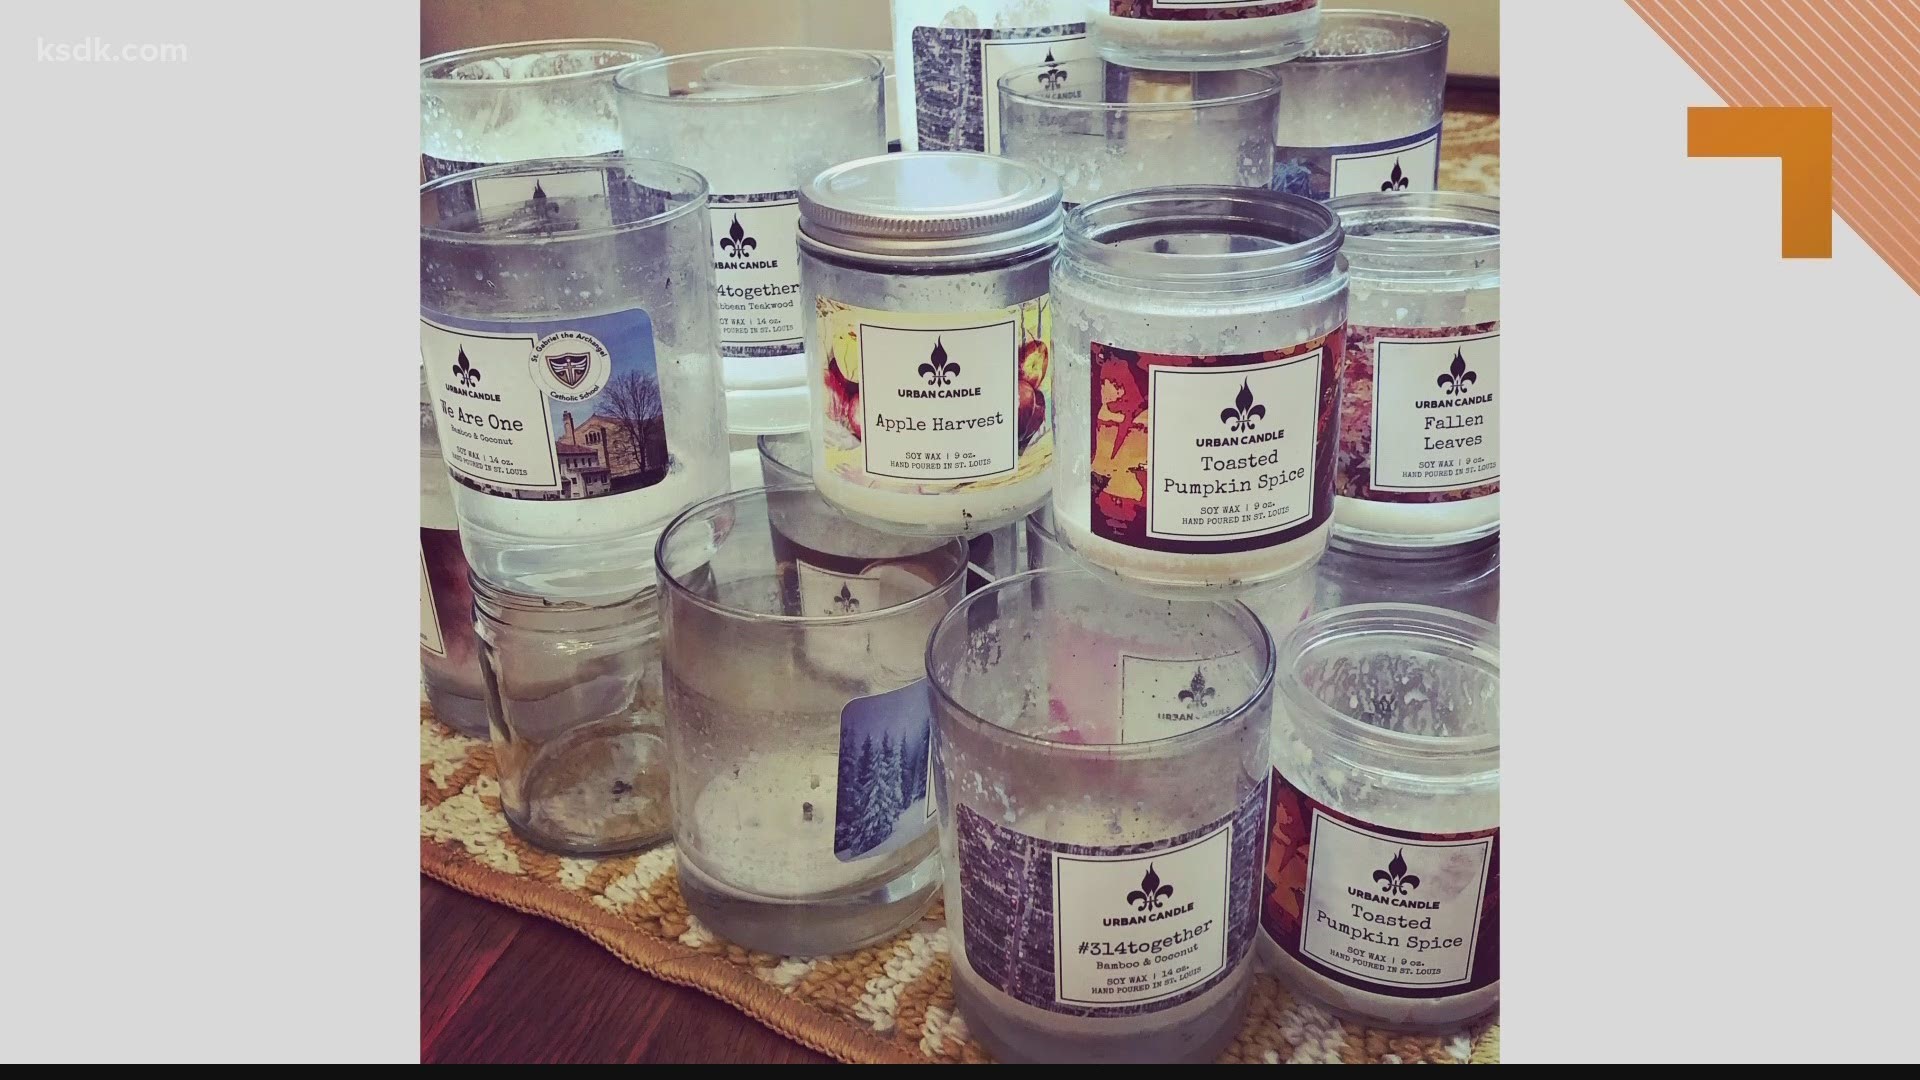 A big part of their mission is giving back, making the world a better place one soy candle at a time.